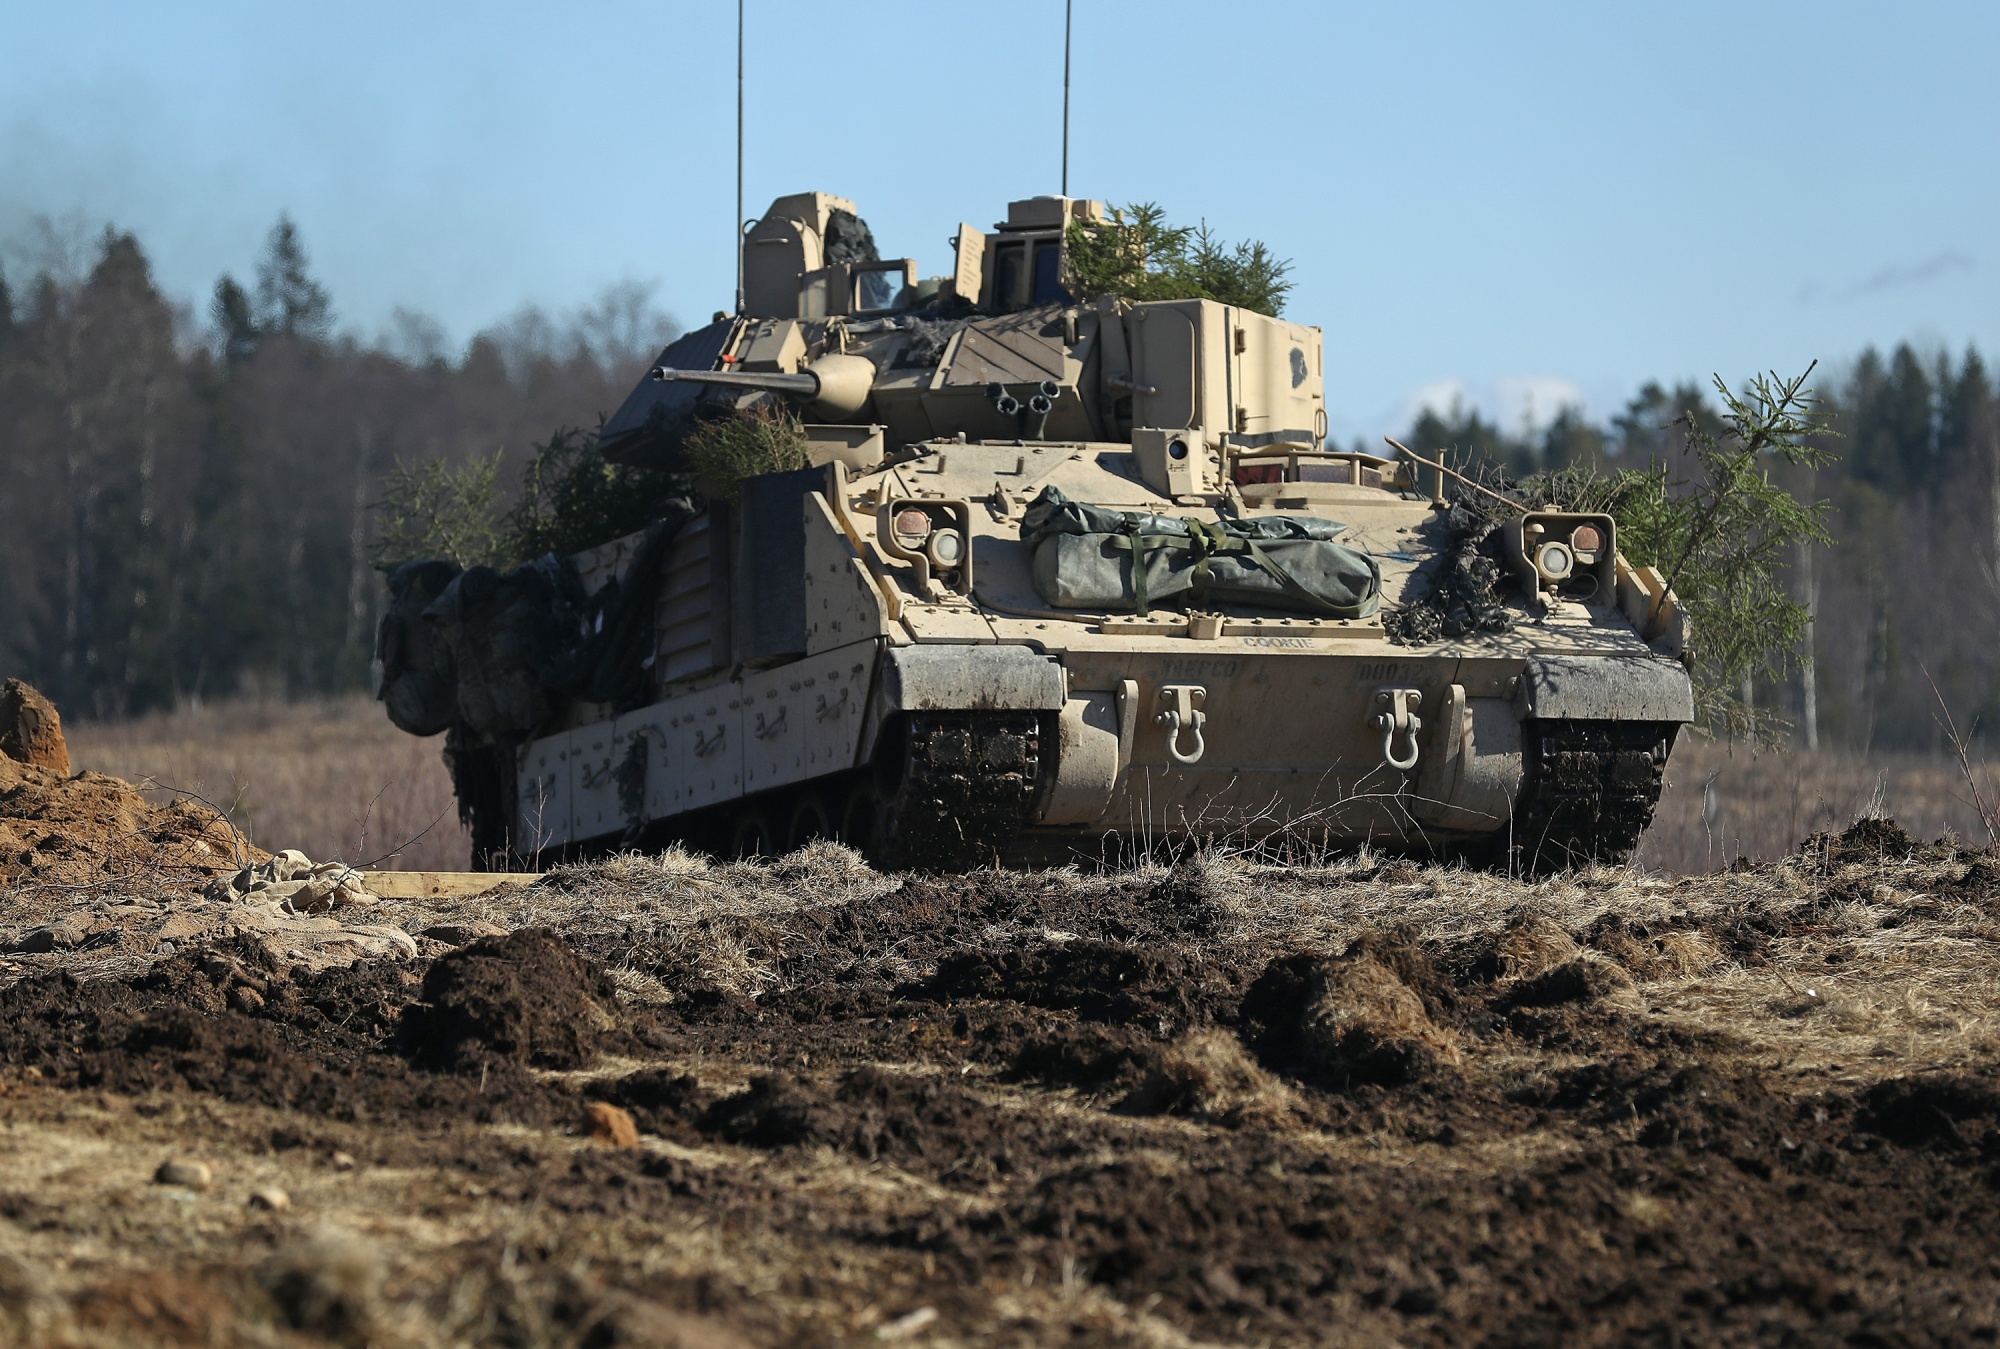 Army Restarts $45 Billion Bradley Armored Vehicle Competition - Bloomberg